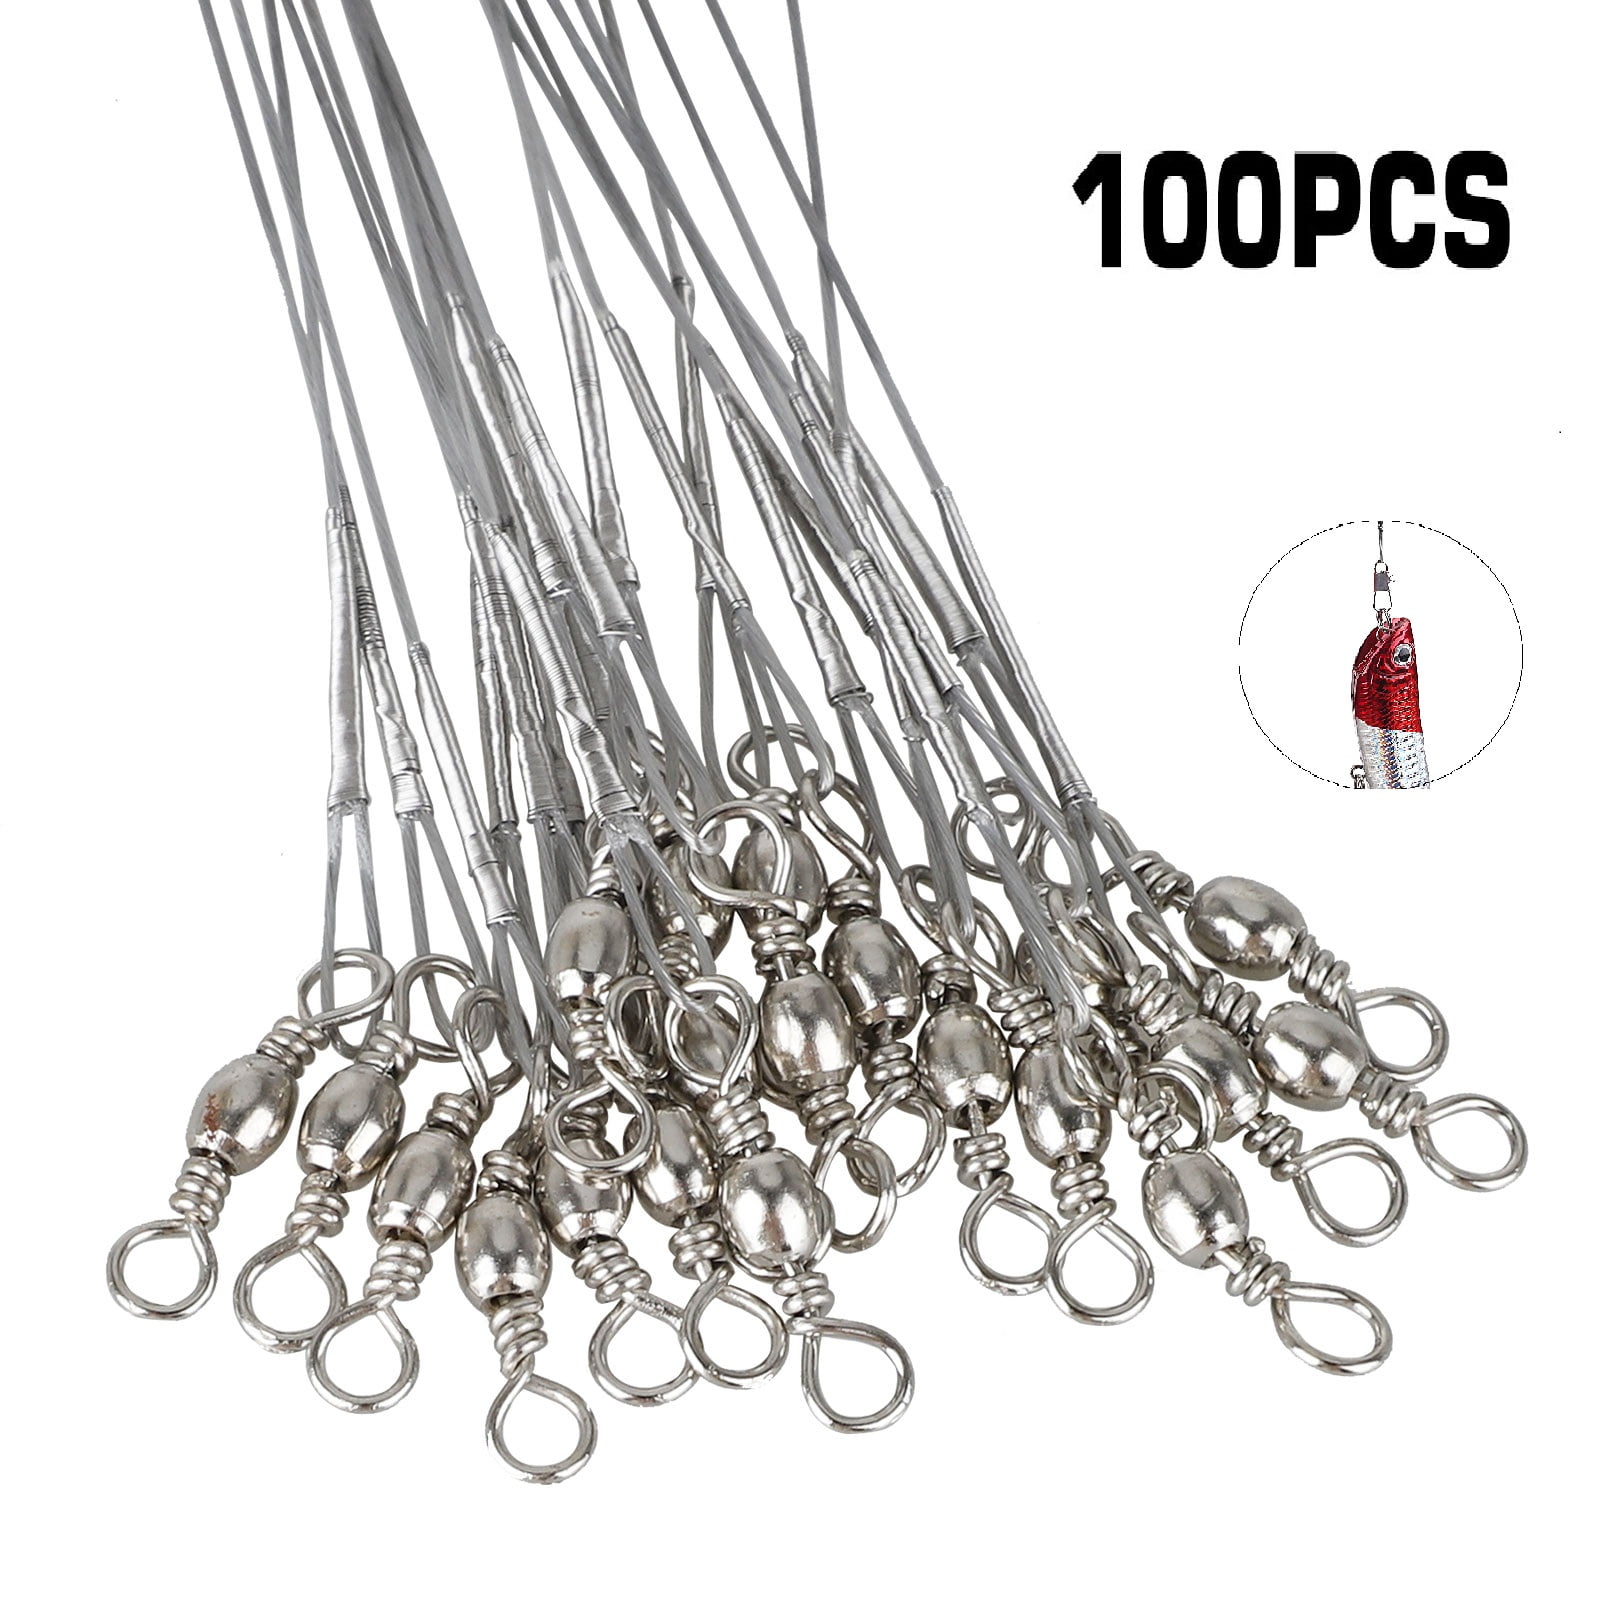 100pcs Trace Wire Leader Stainless Steel Fishing Line Leaders With Snap & Swivel 